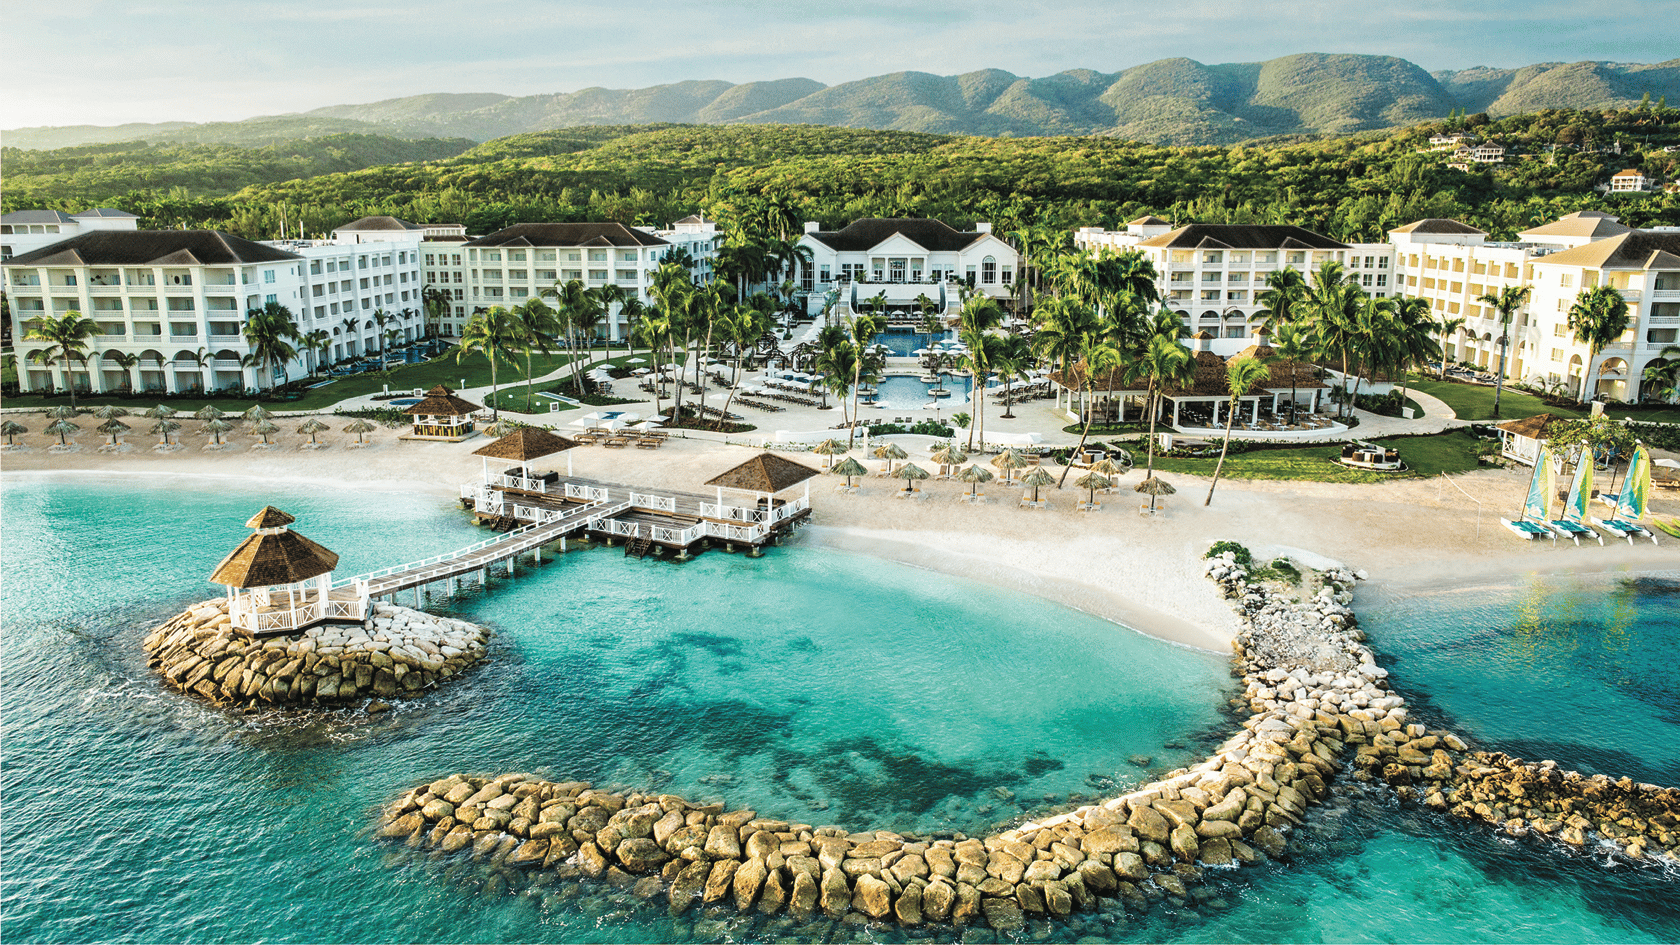 How to Have a Last-Minute Caribbean Getaway